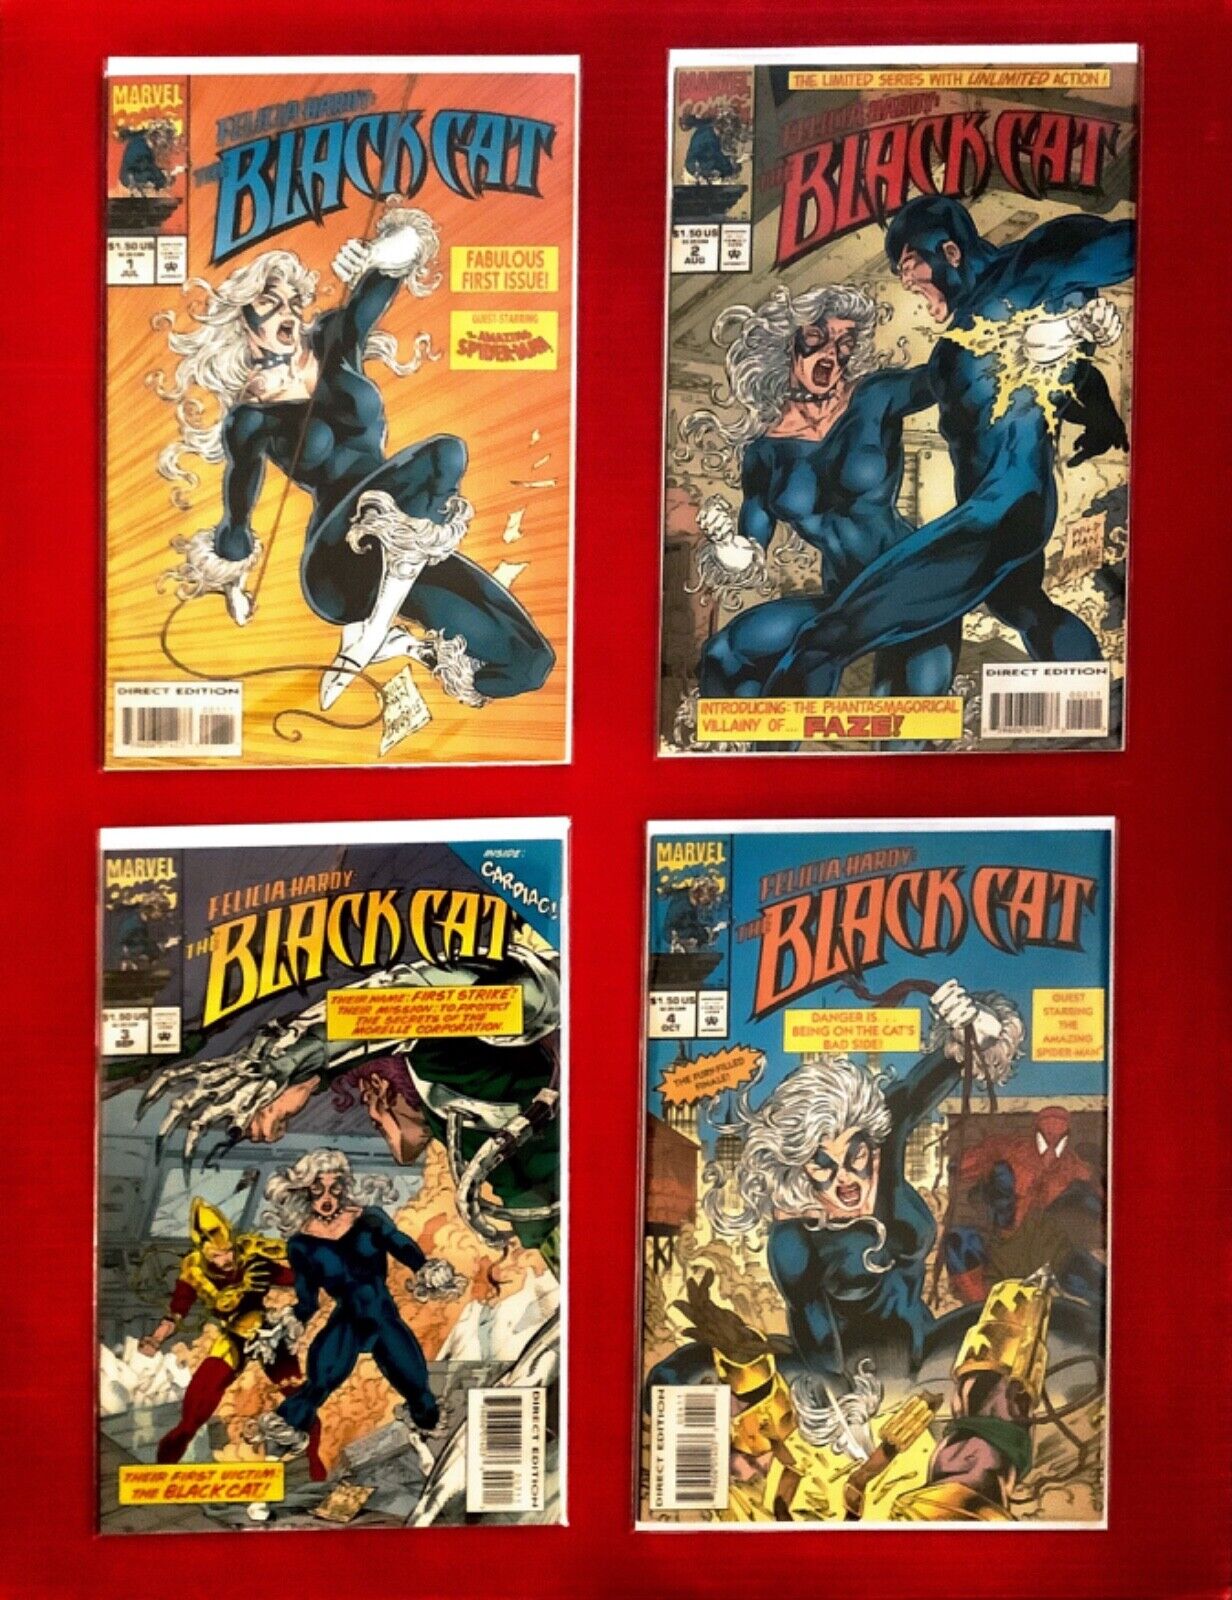 FELICIA HARDY  THE BLACK CAT #1-4 SET NEAR MINT  BUY THIS KITTY TODAY SPIDER-MAN